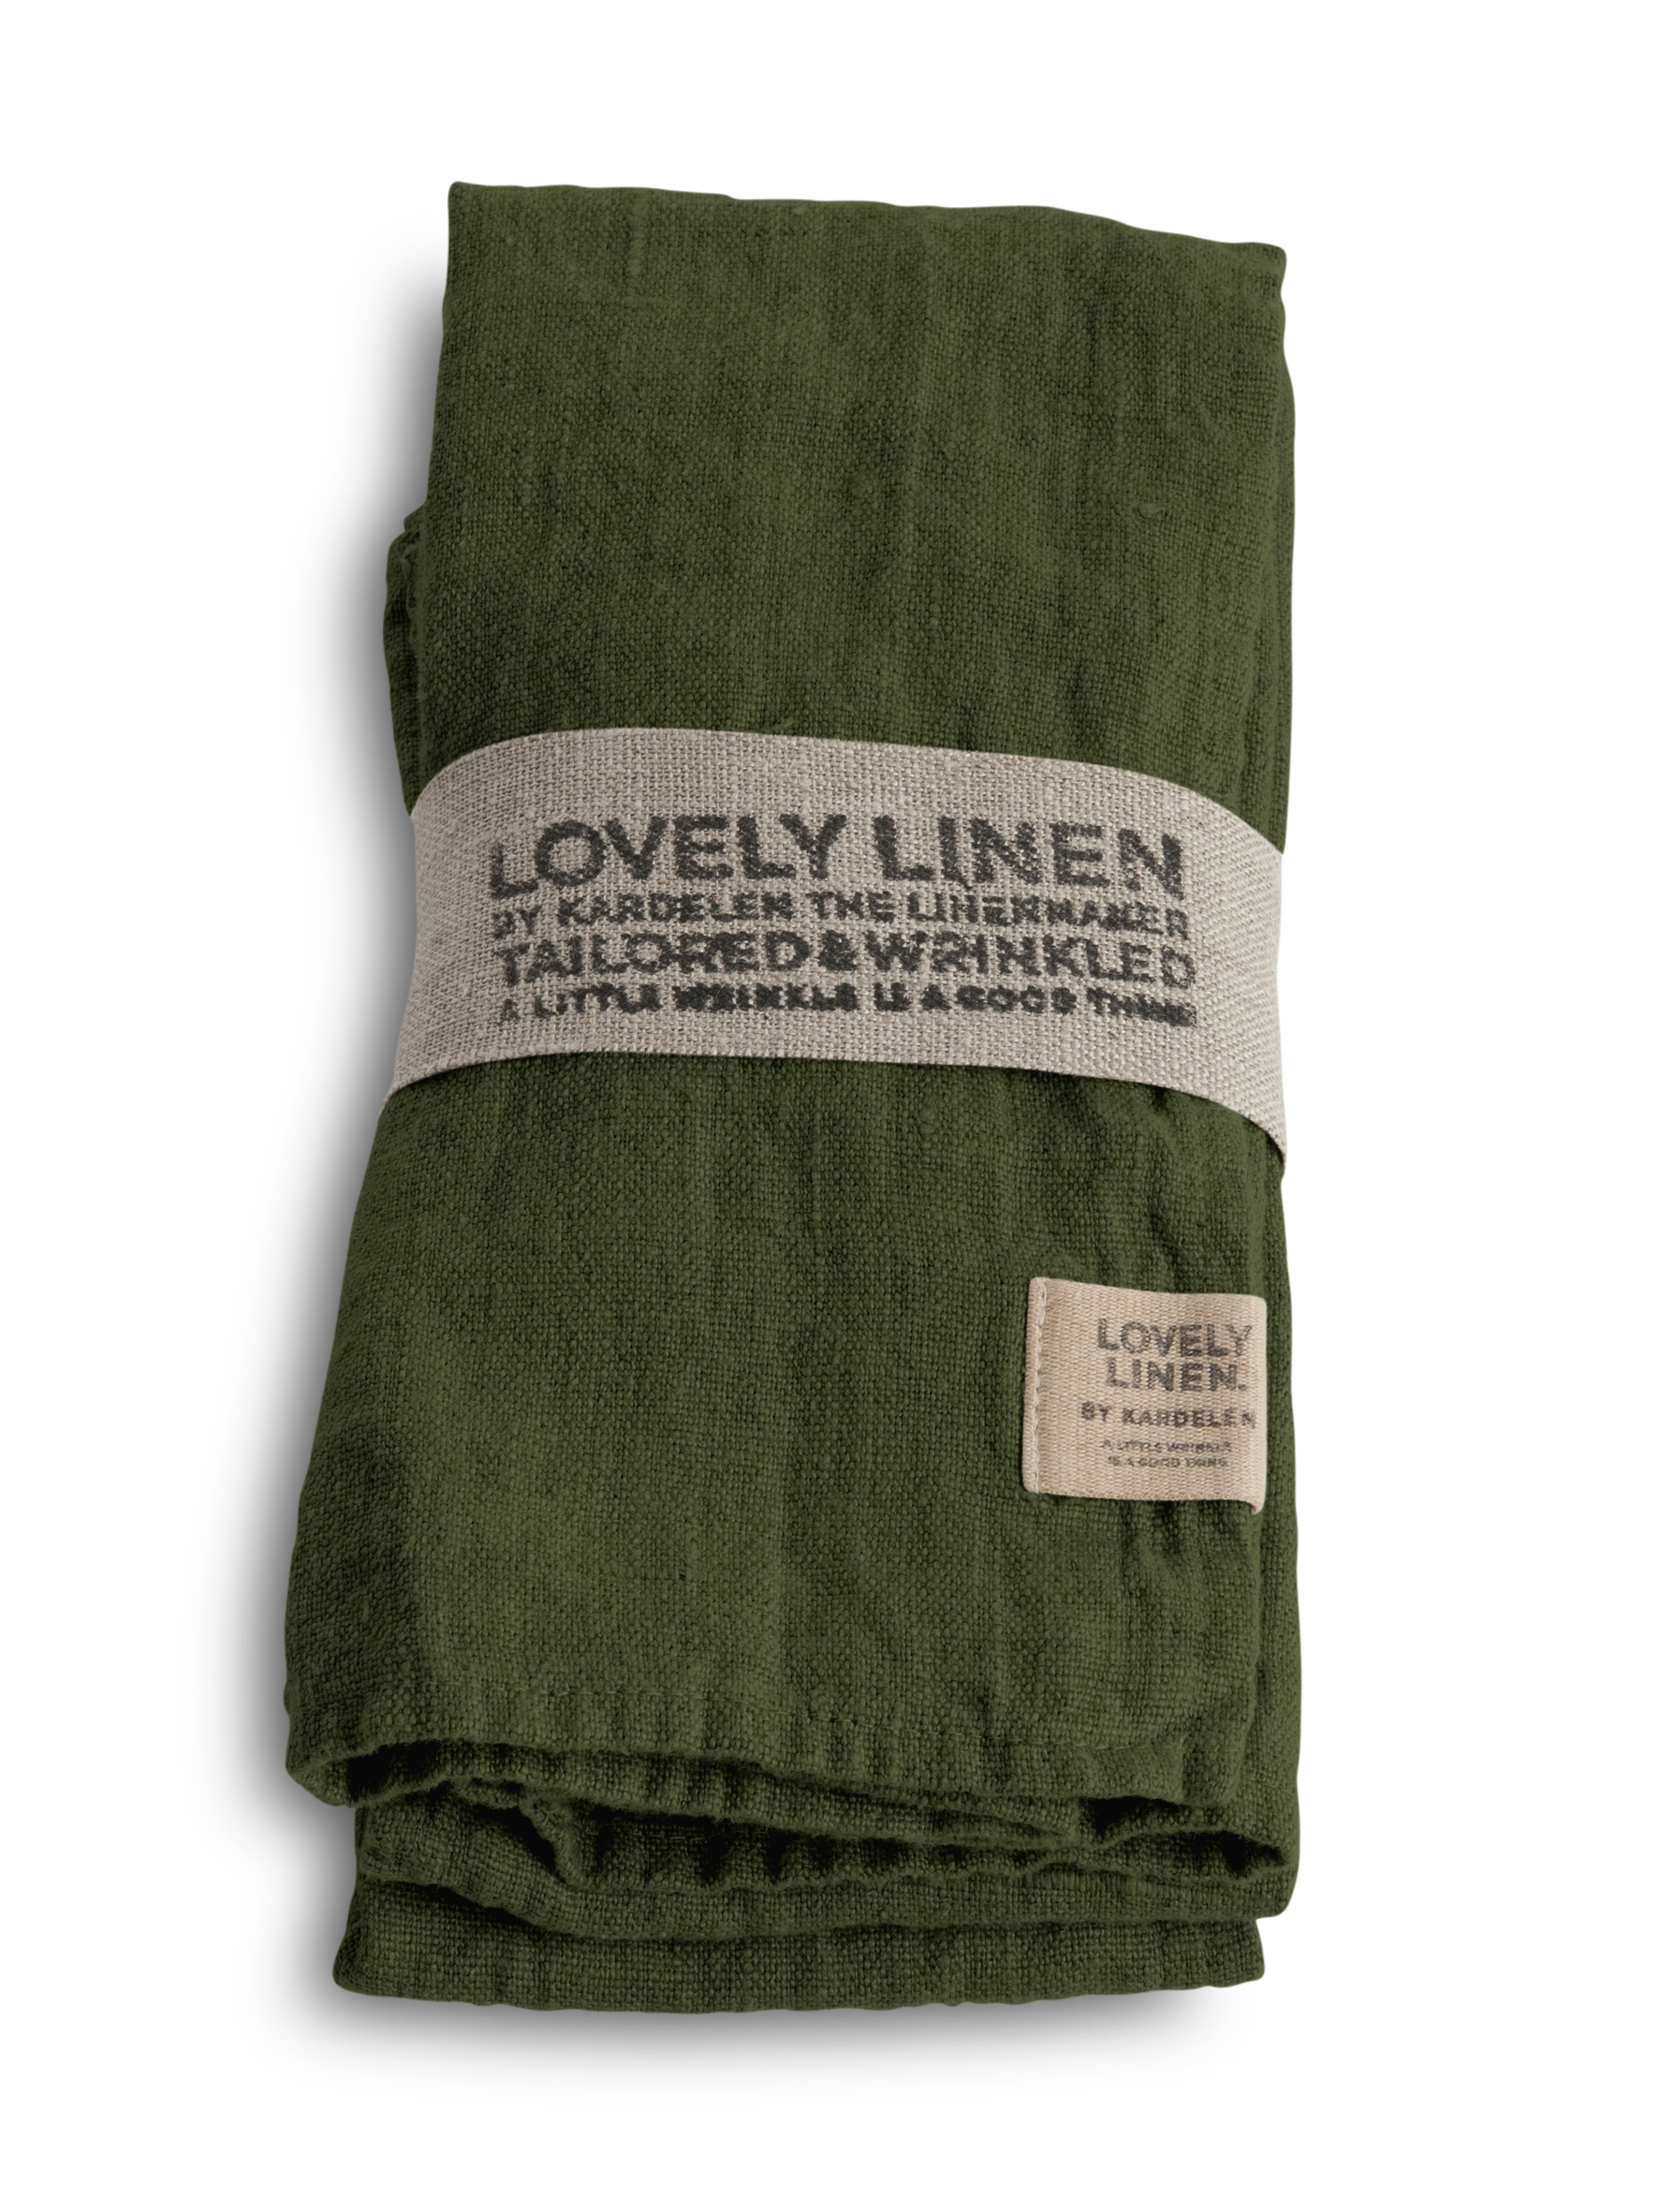 lovely-linen-100-european-linen-table-cloth-in-jeep-green-size-l